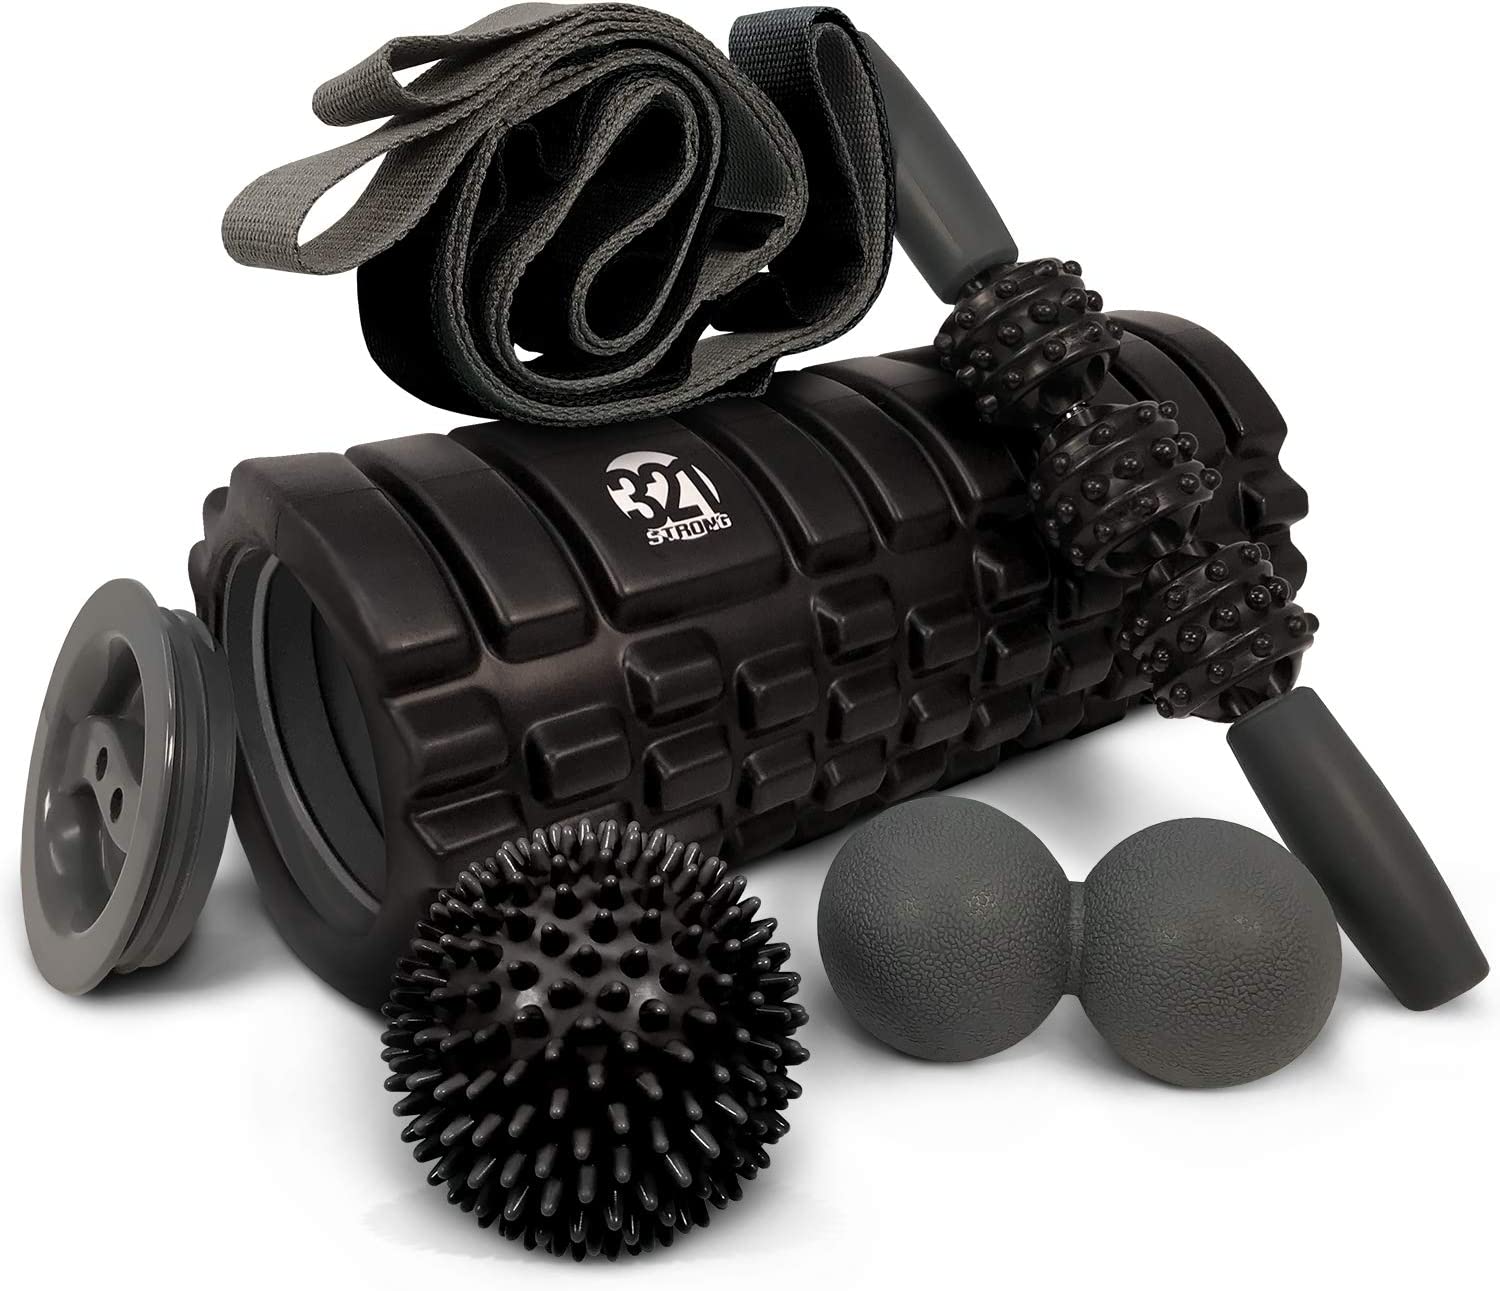  7. 321 STRONG Foam Rollers for Back 